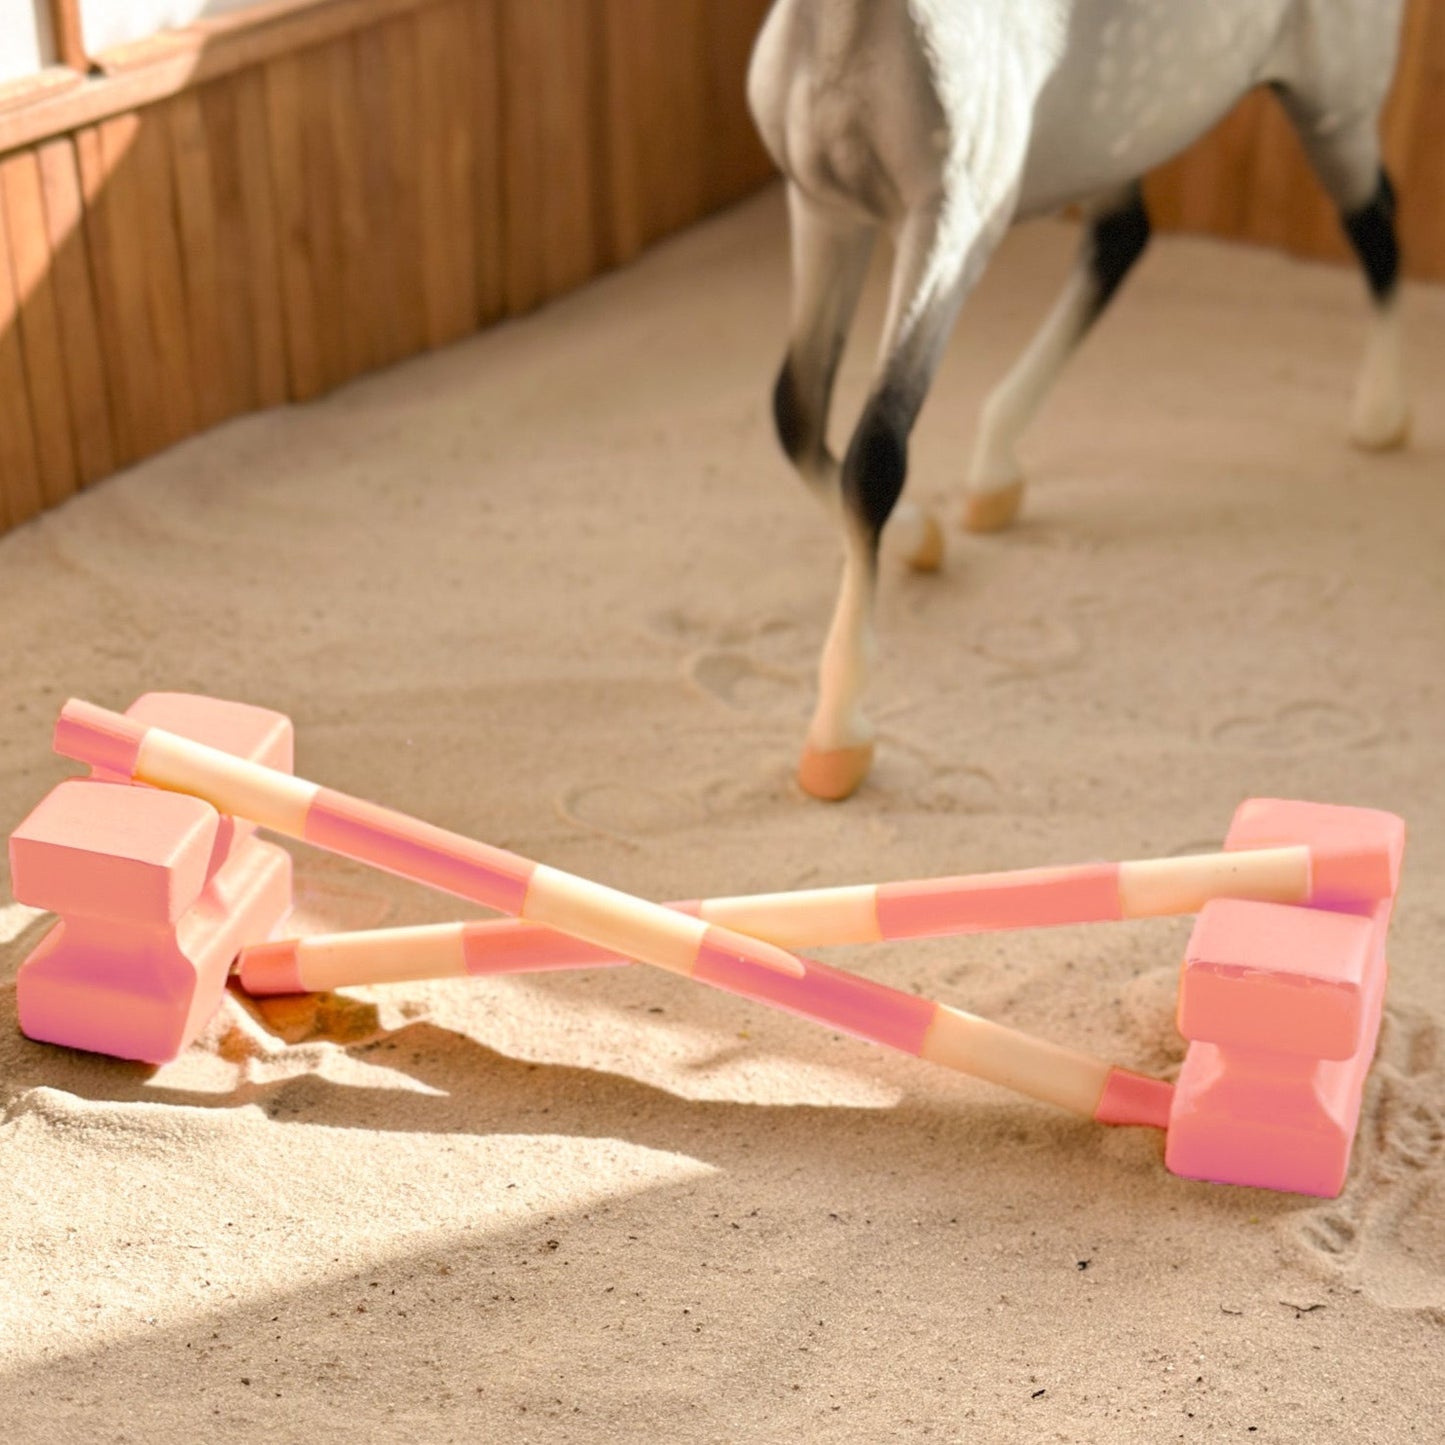 3D printed Cavaletti block set for Breyer Classic  model horses (scale 1:12) in pink